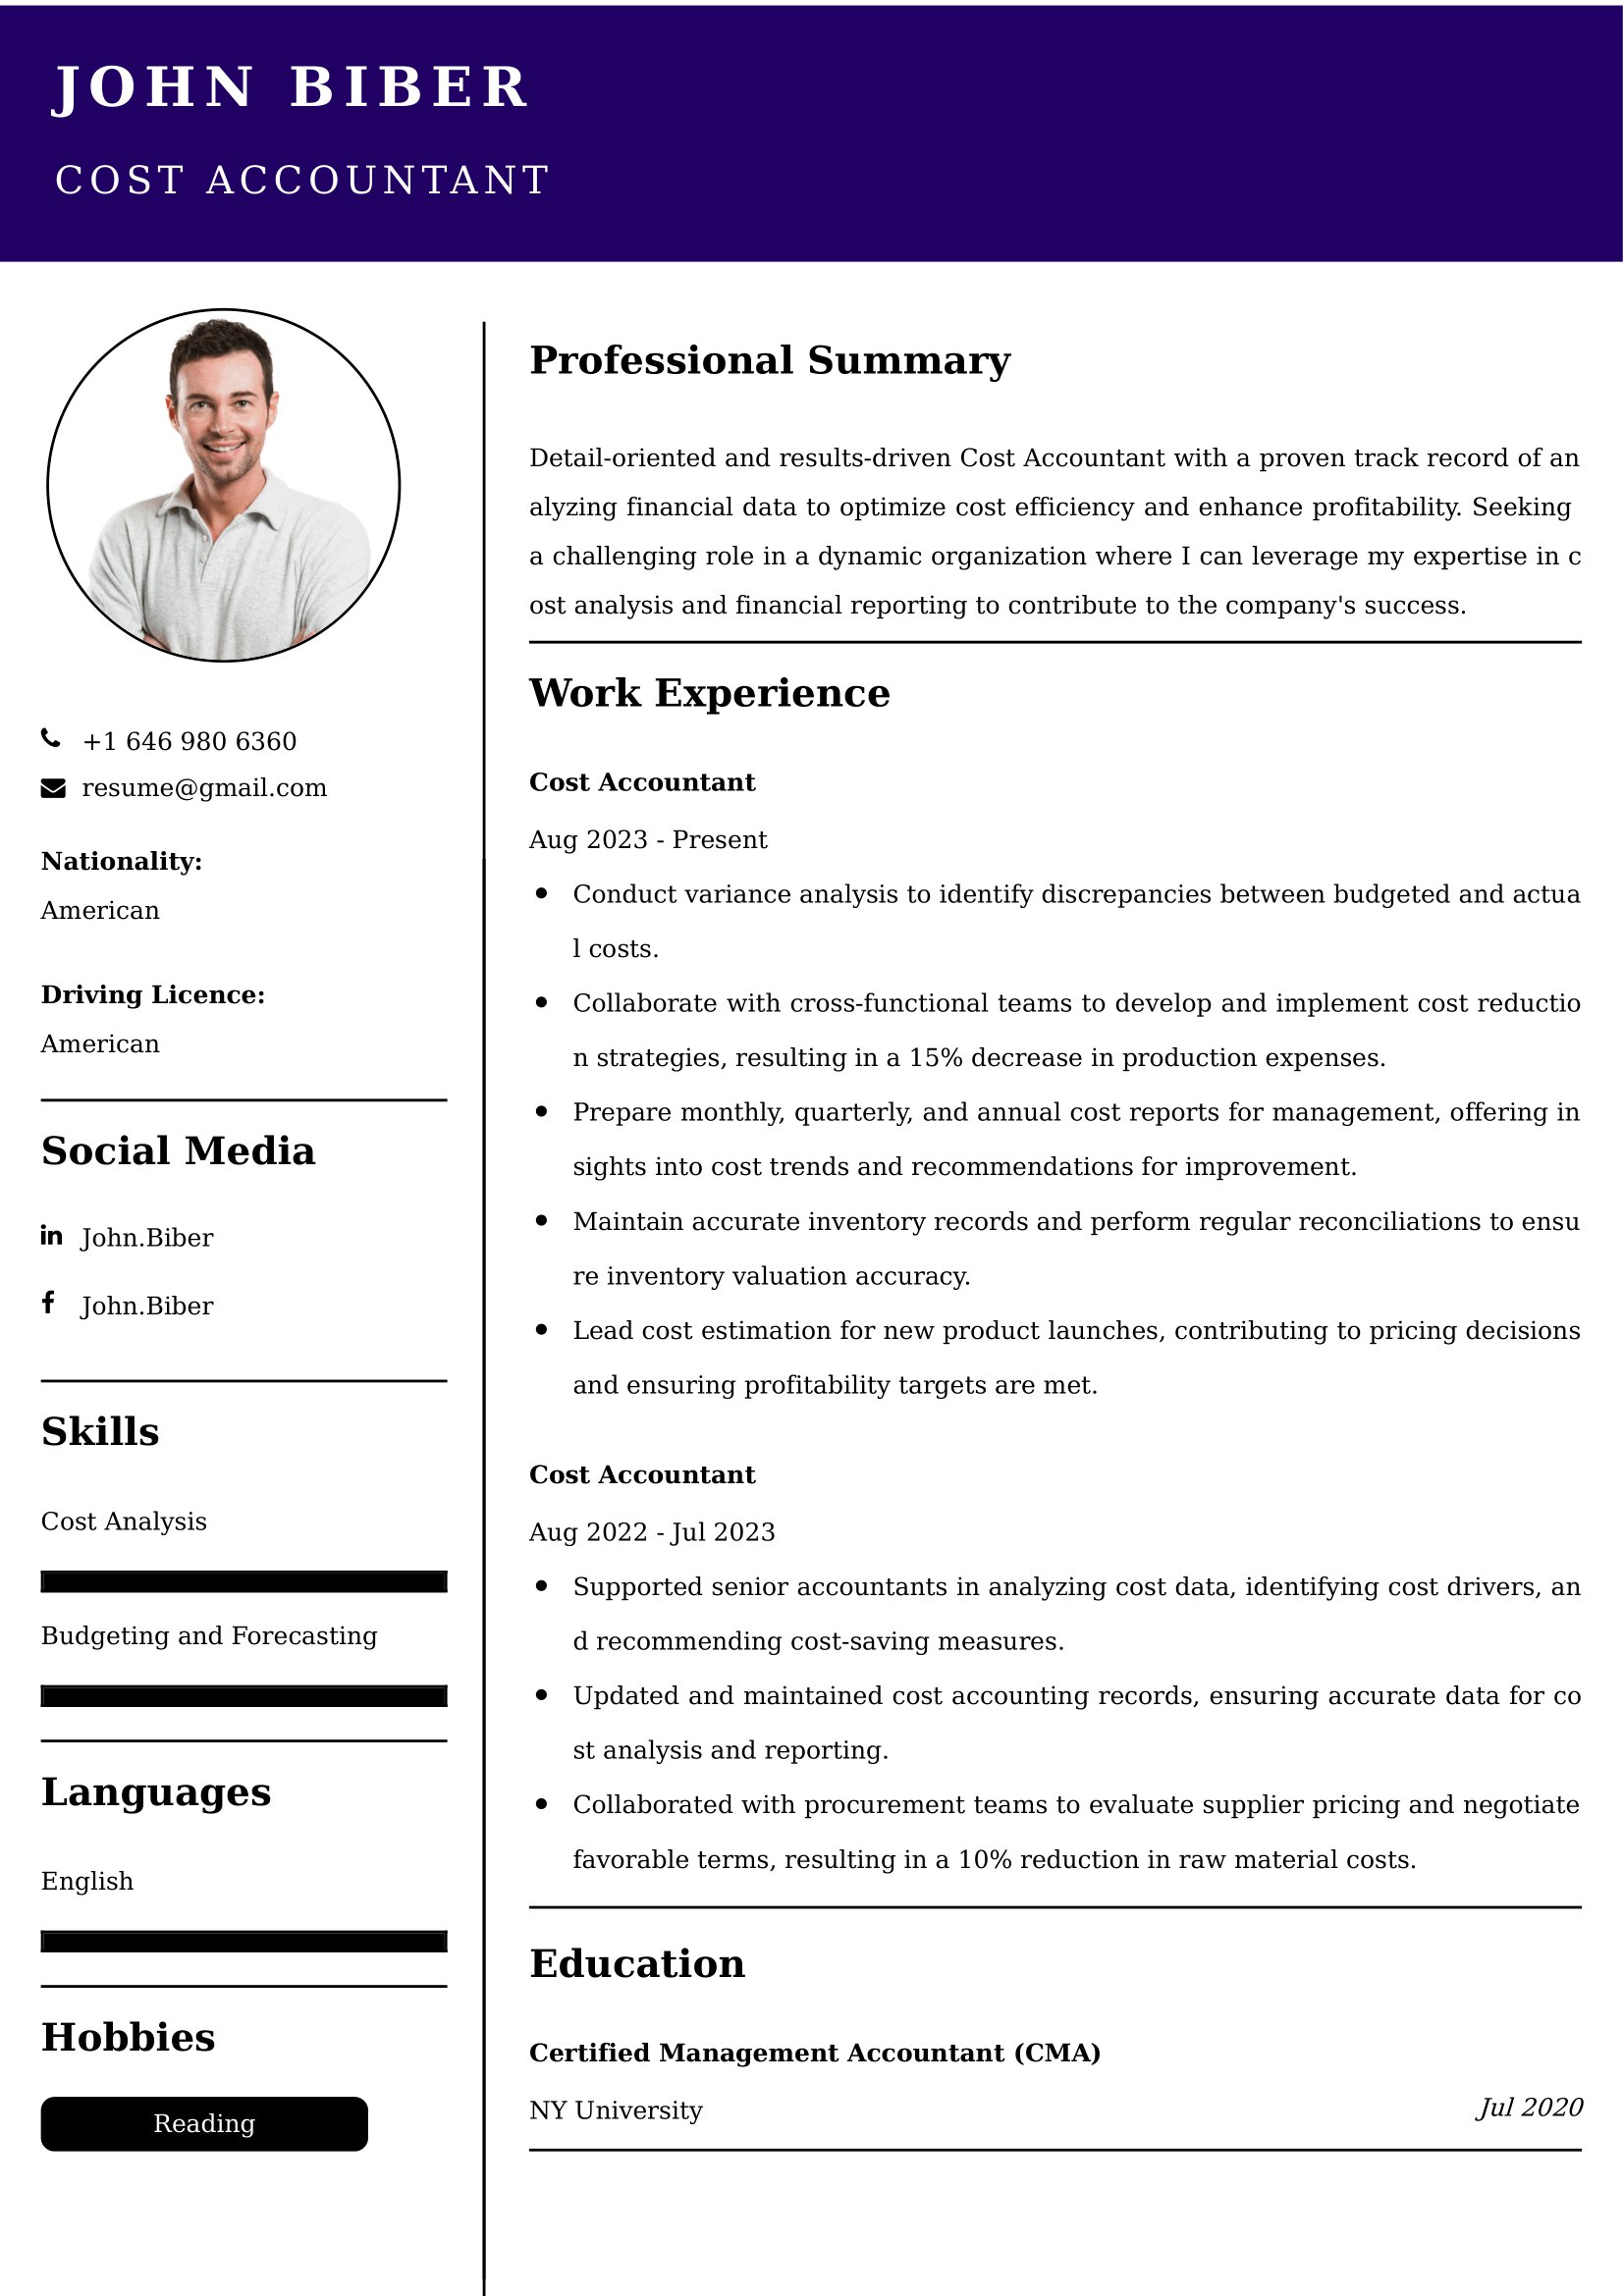 Cost Accountant Resume Sample